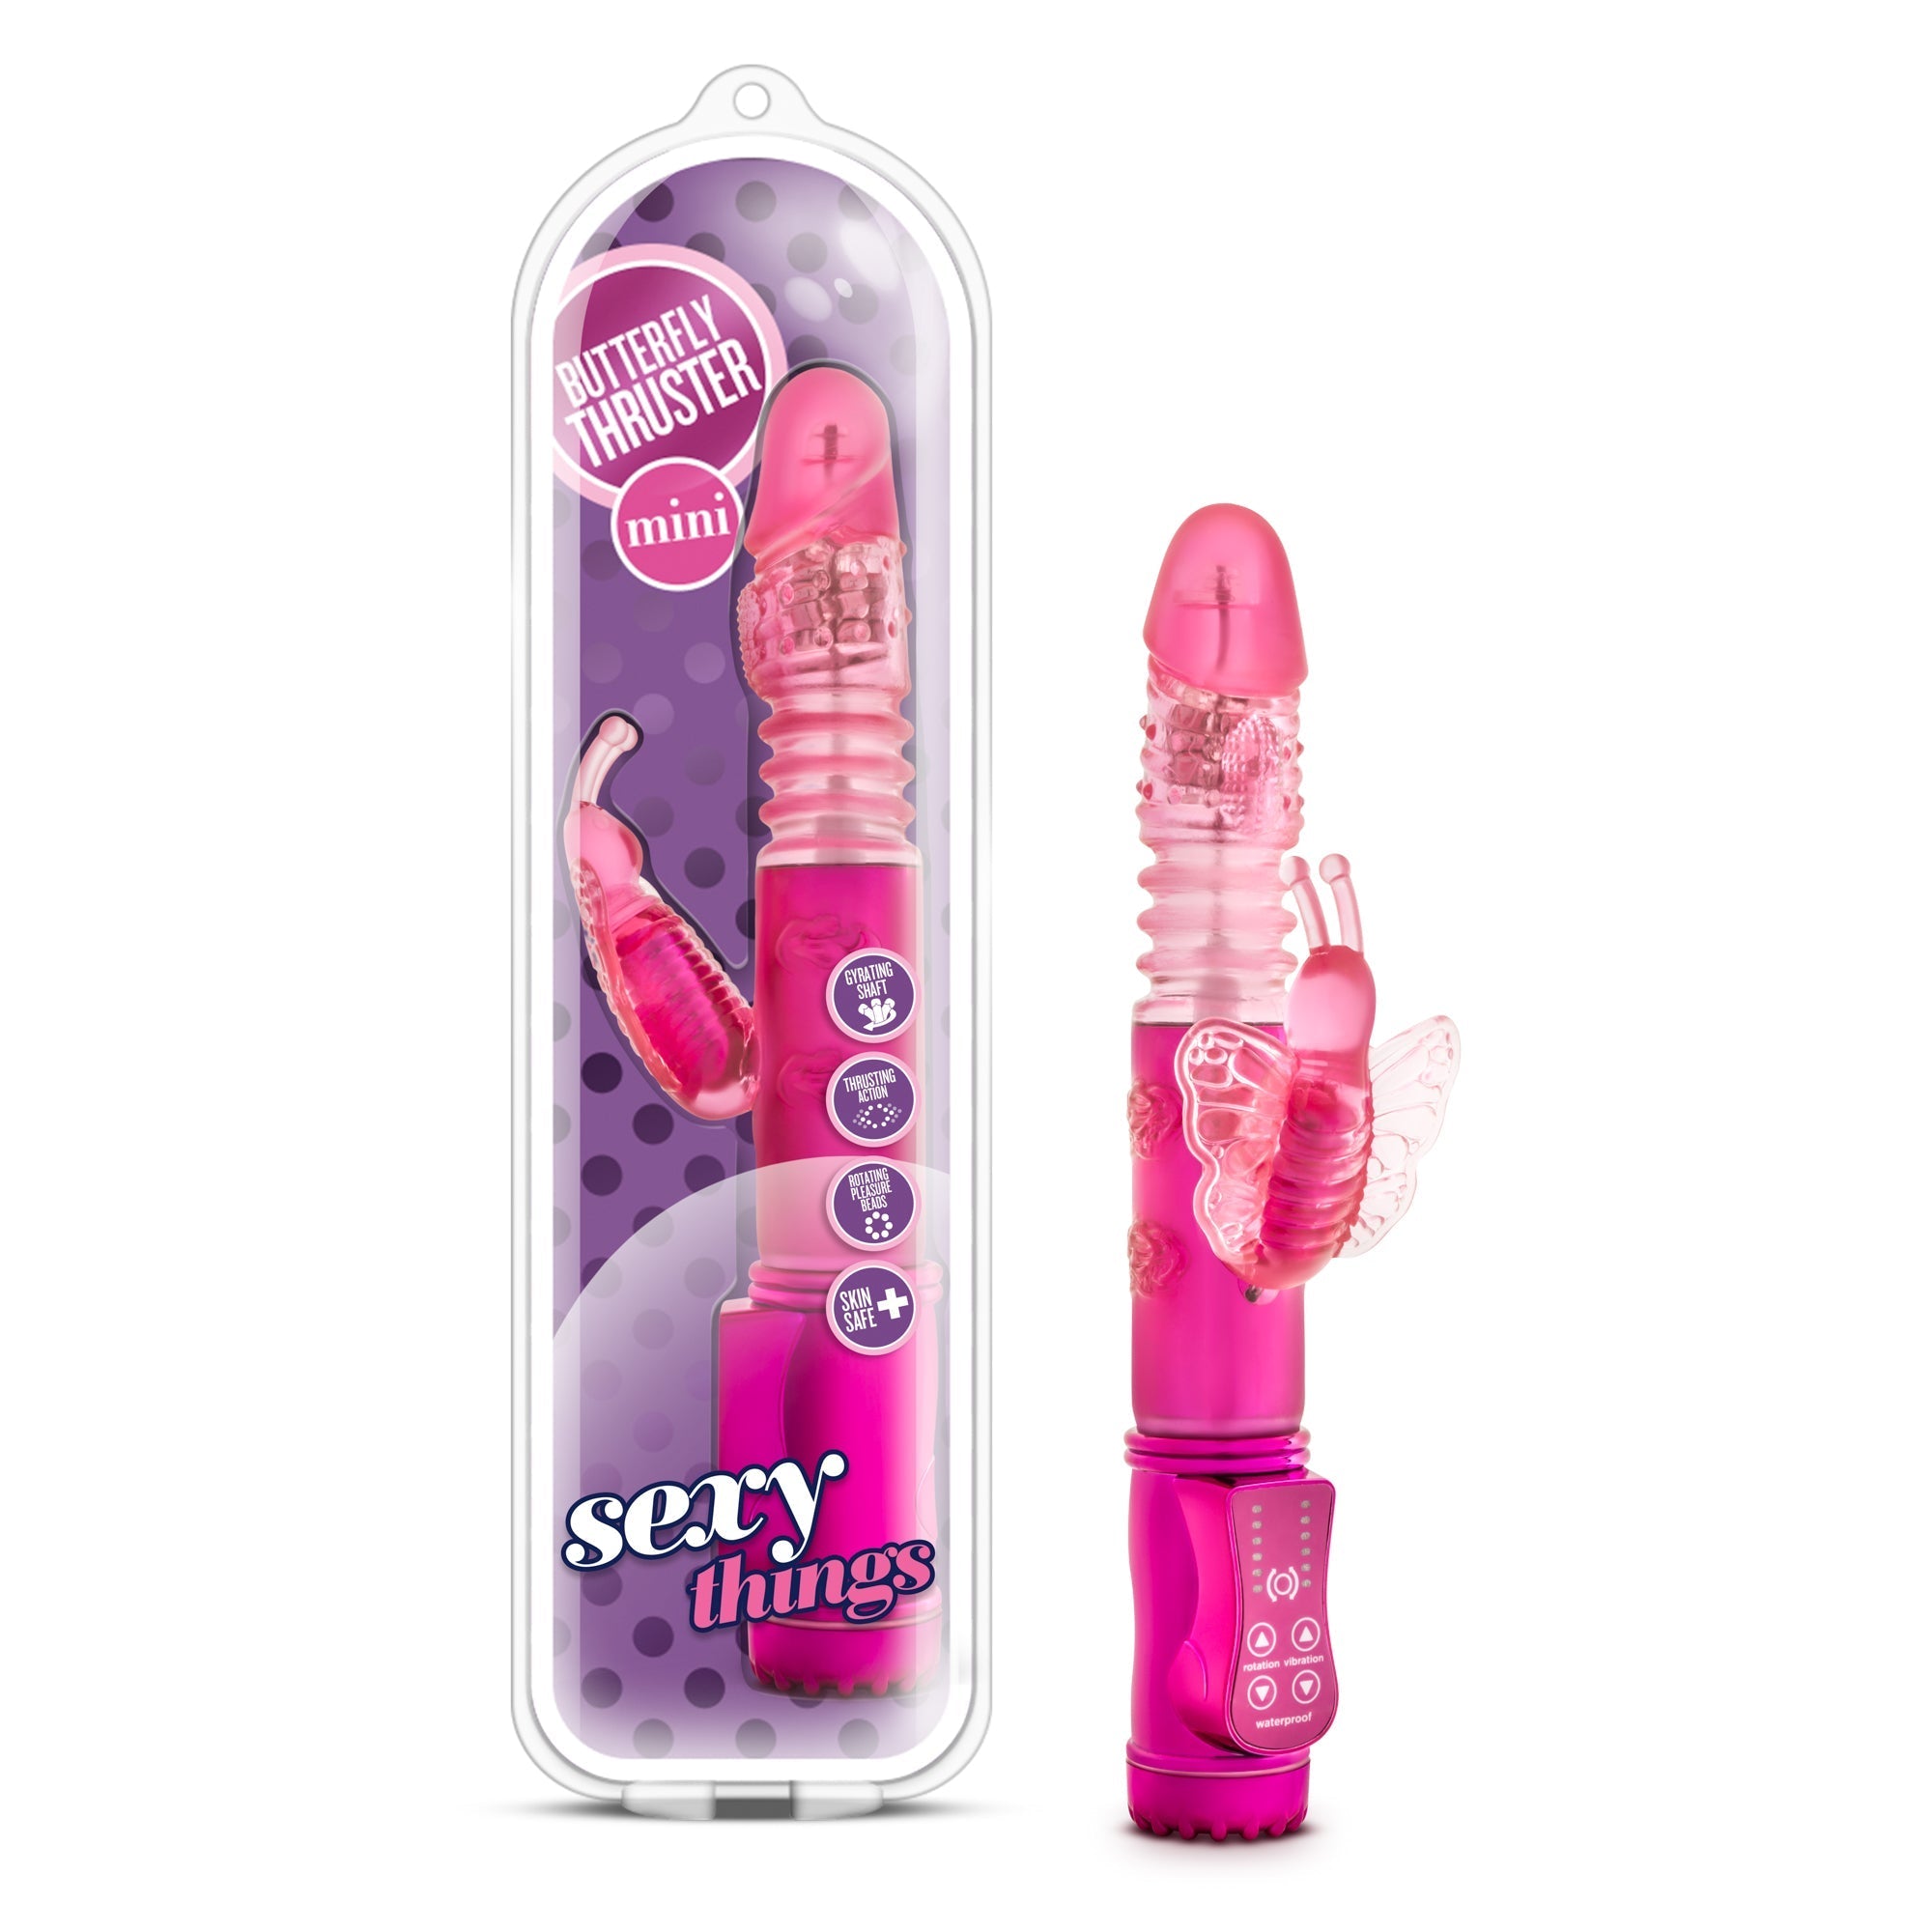 Ultimate pleasure with Blush Butterfly Thruster Mini